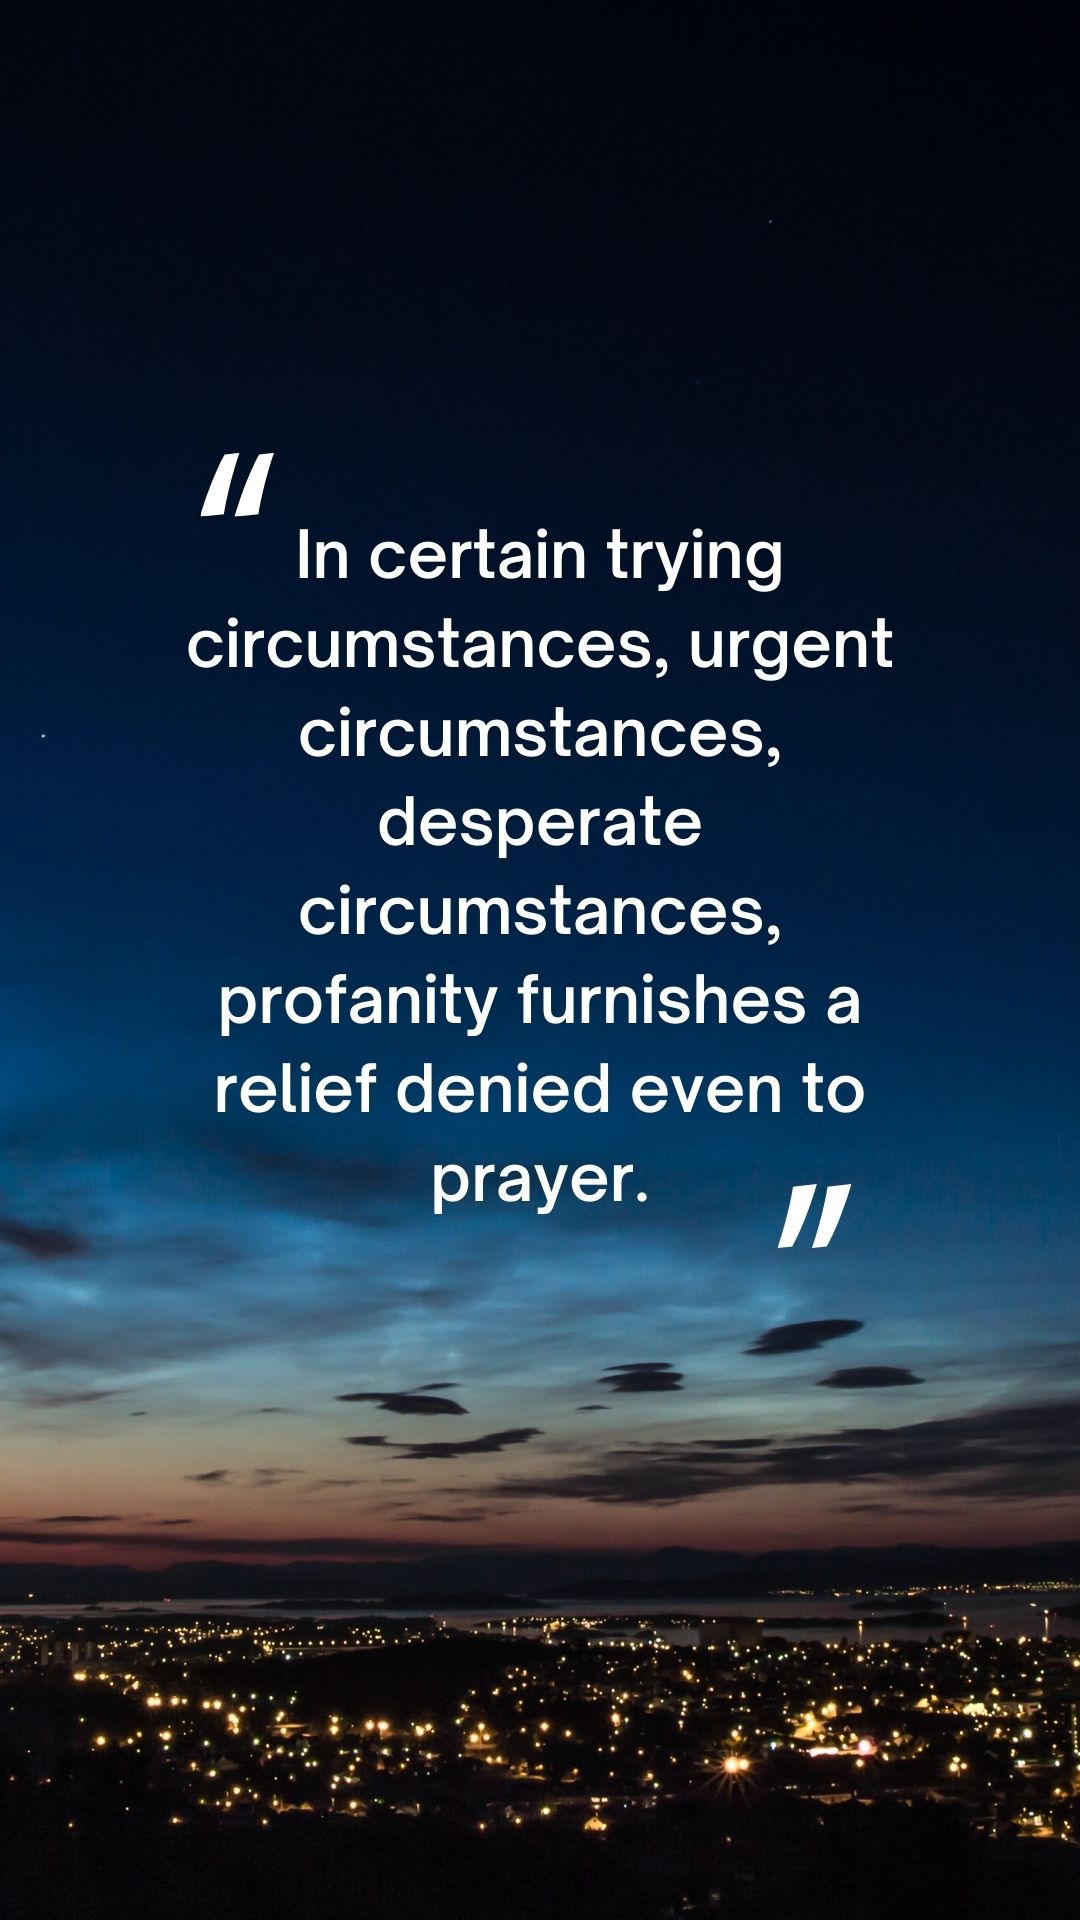 In certain trying circumstances urgent circumstances desperate circumstances profanity furnishes a relief denied even to prayer